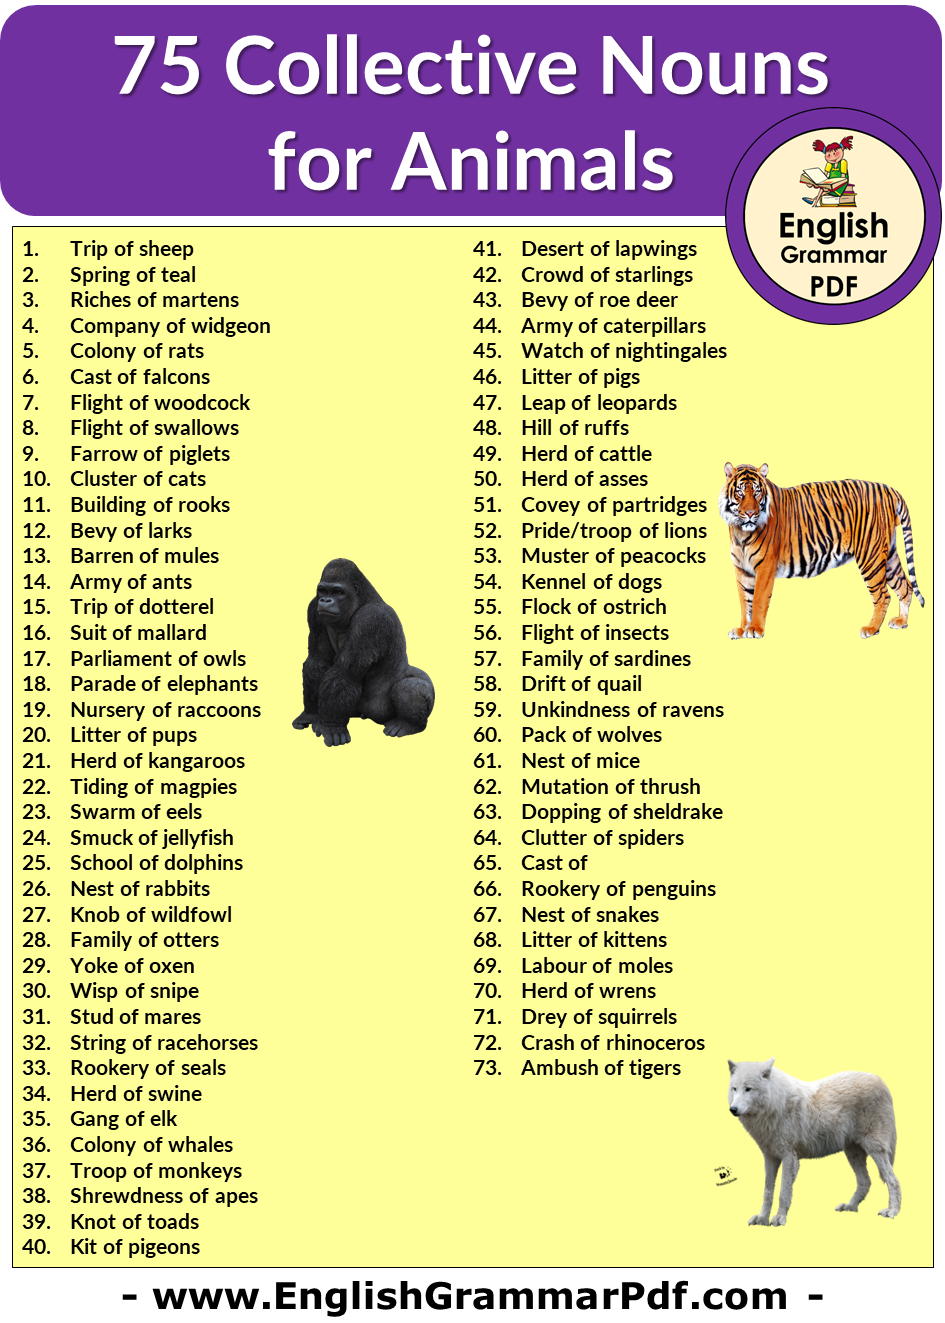 75 Collective Nouns for Animals in English